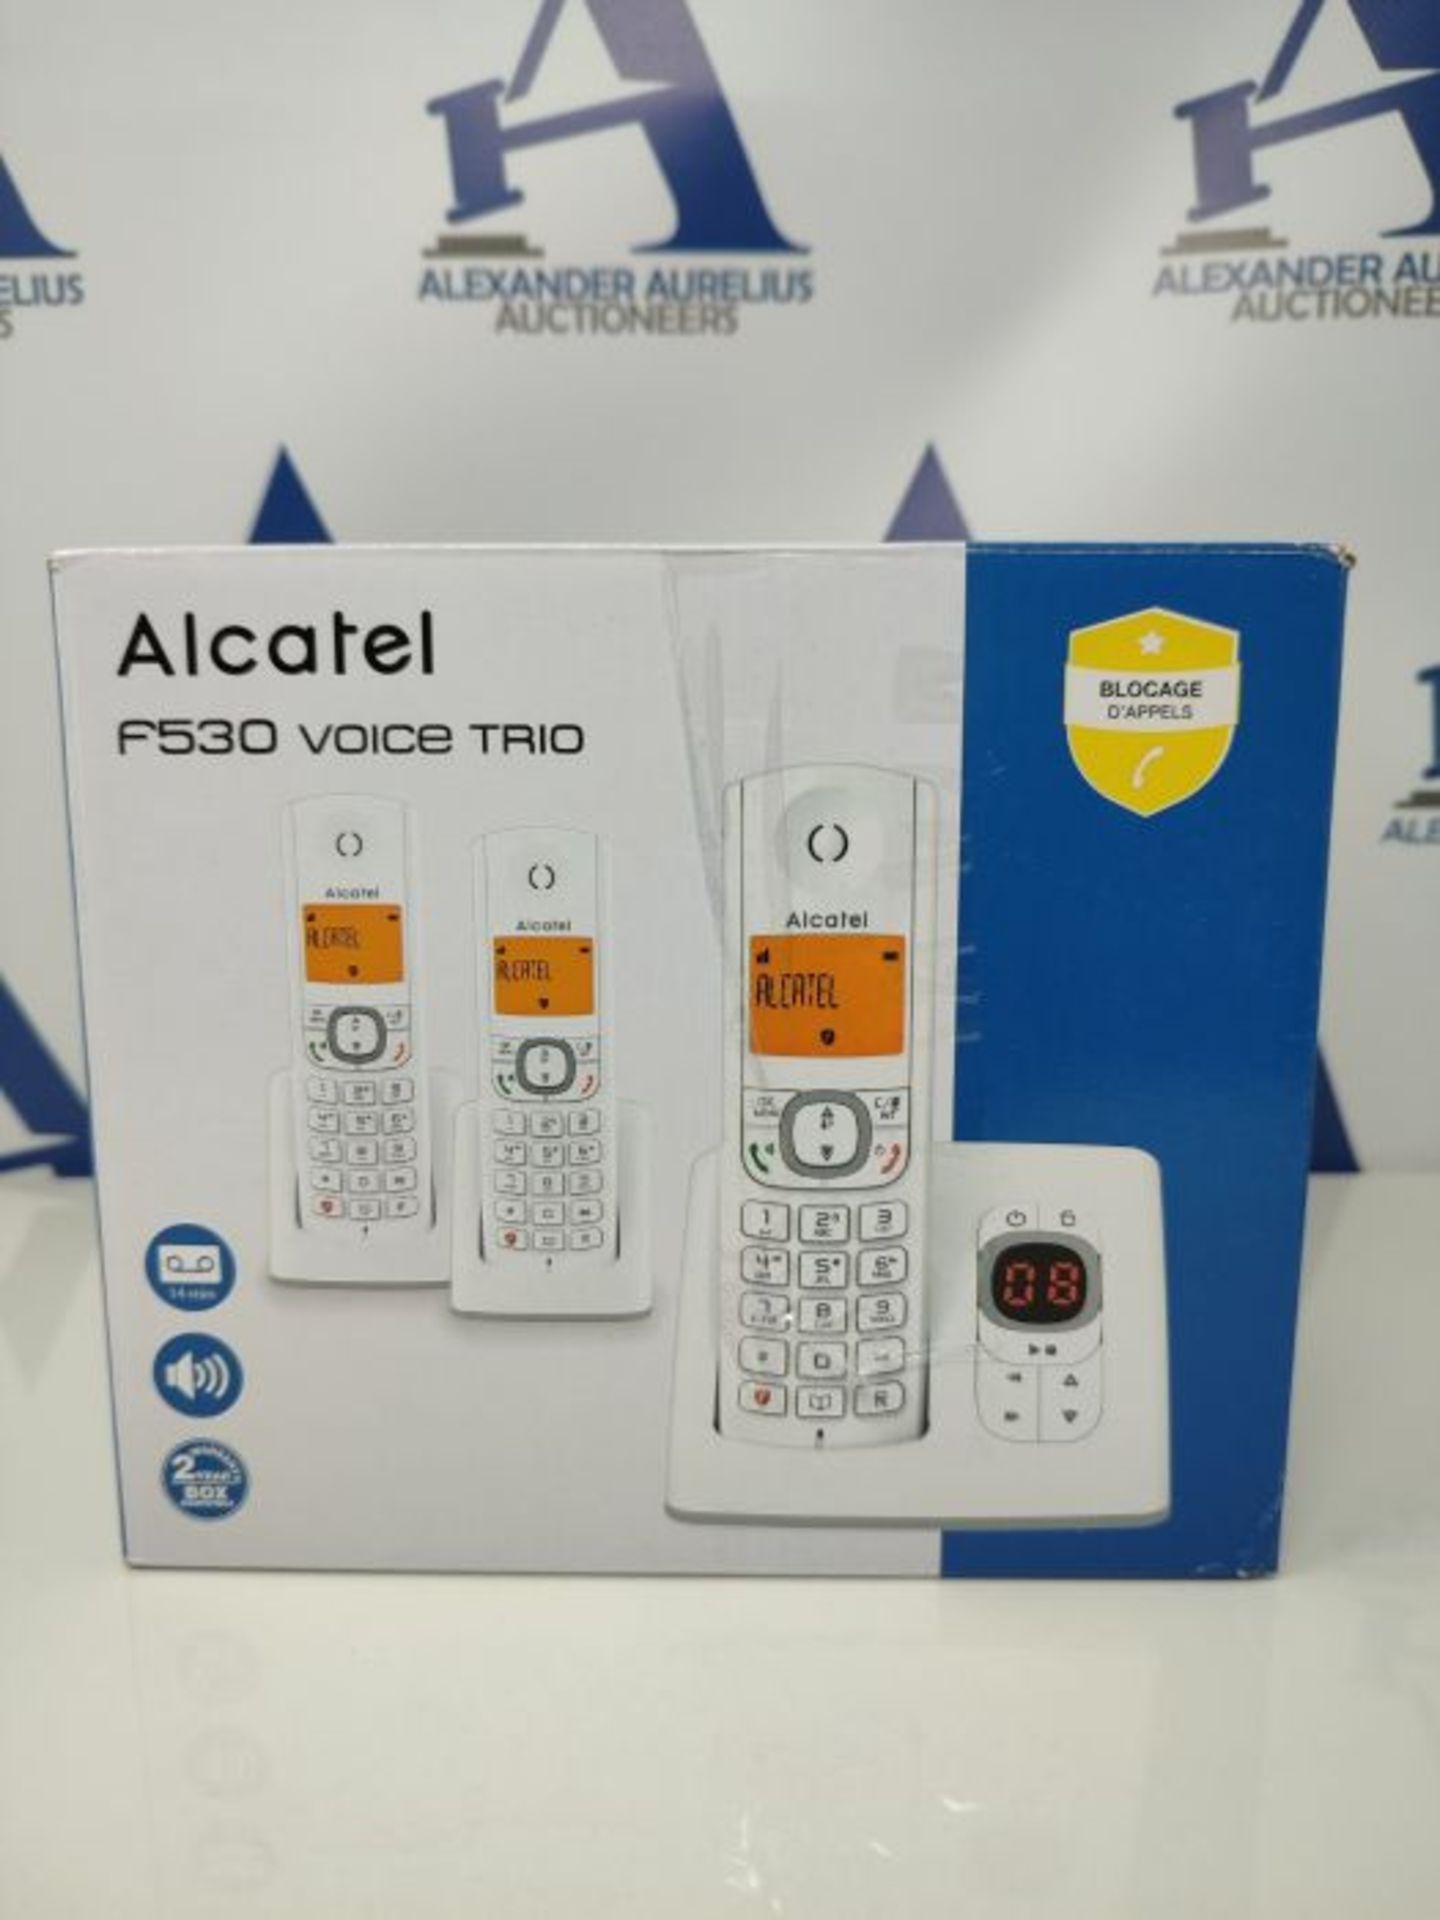 RRP £69.00 Alcatel F530 Voice TRIO Candy-Bar - Image 2 of 9